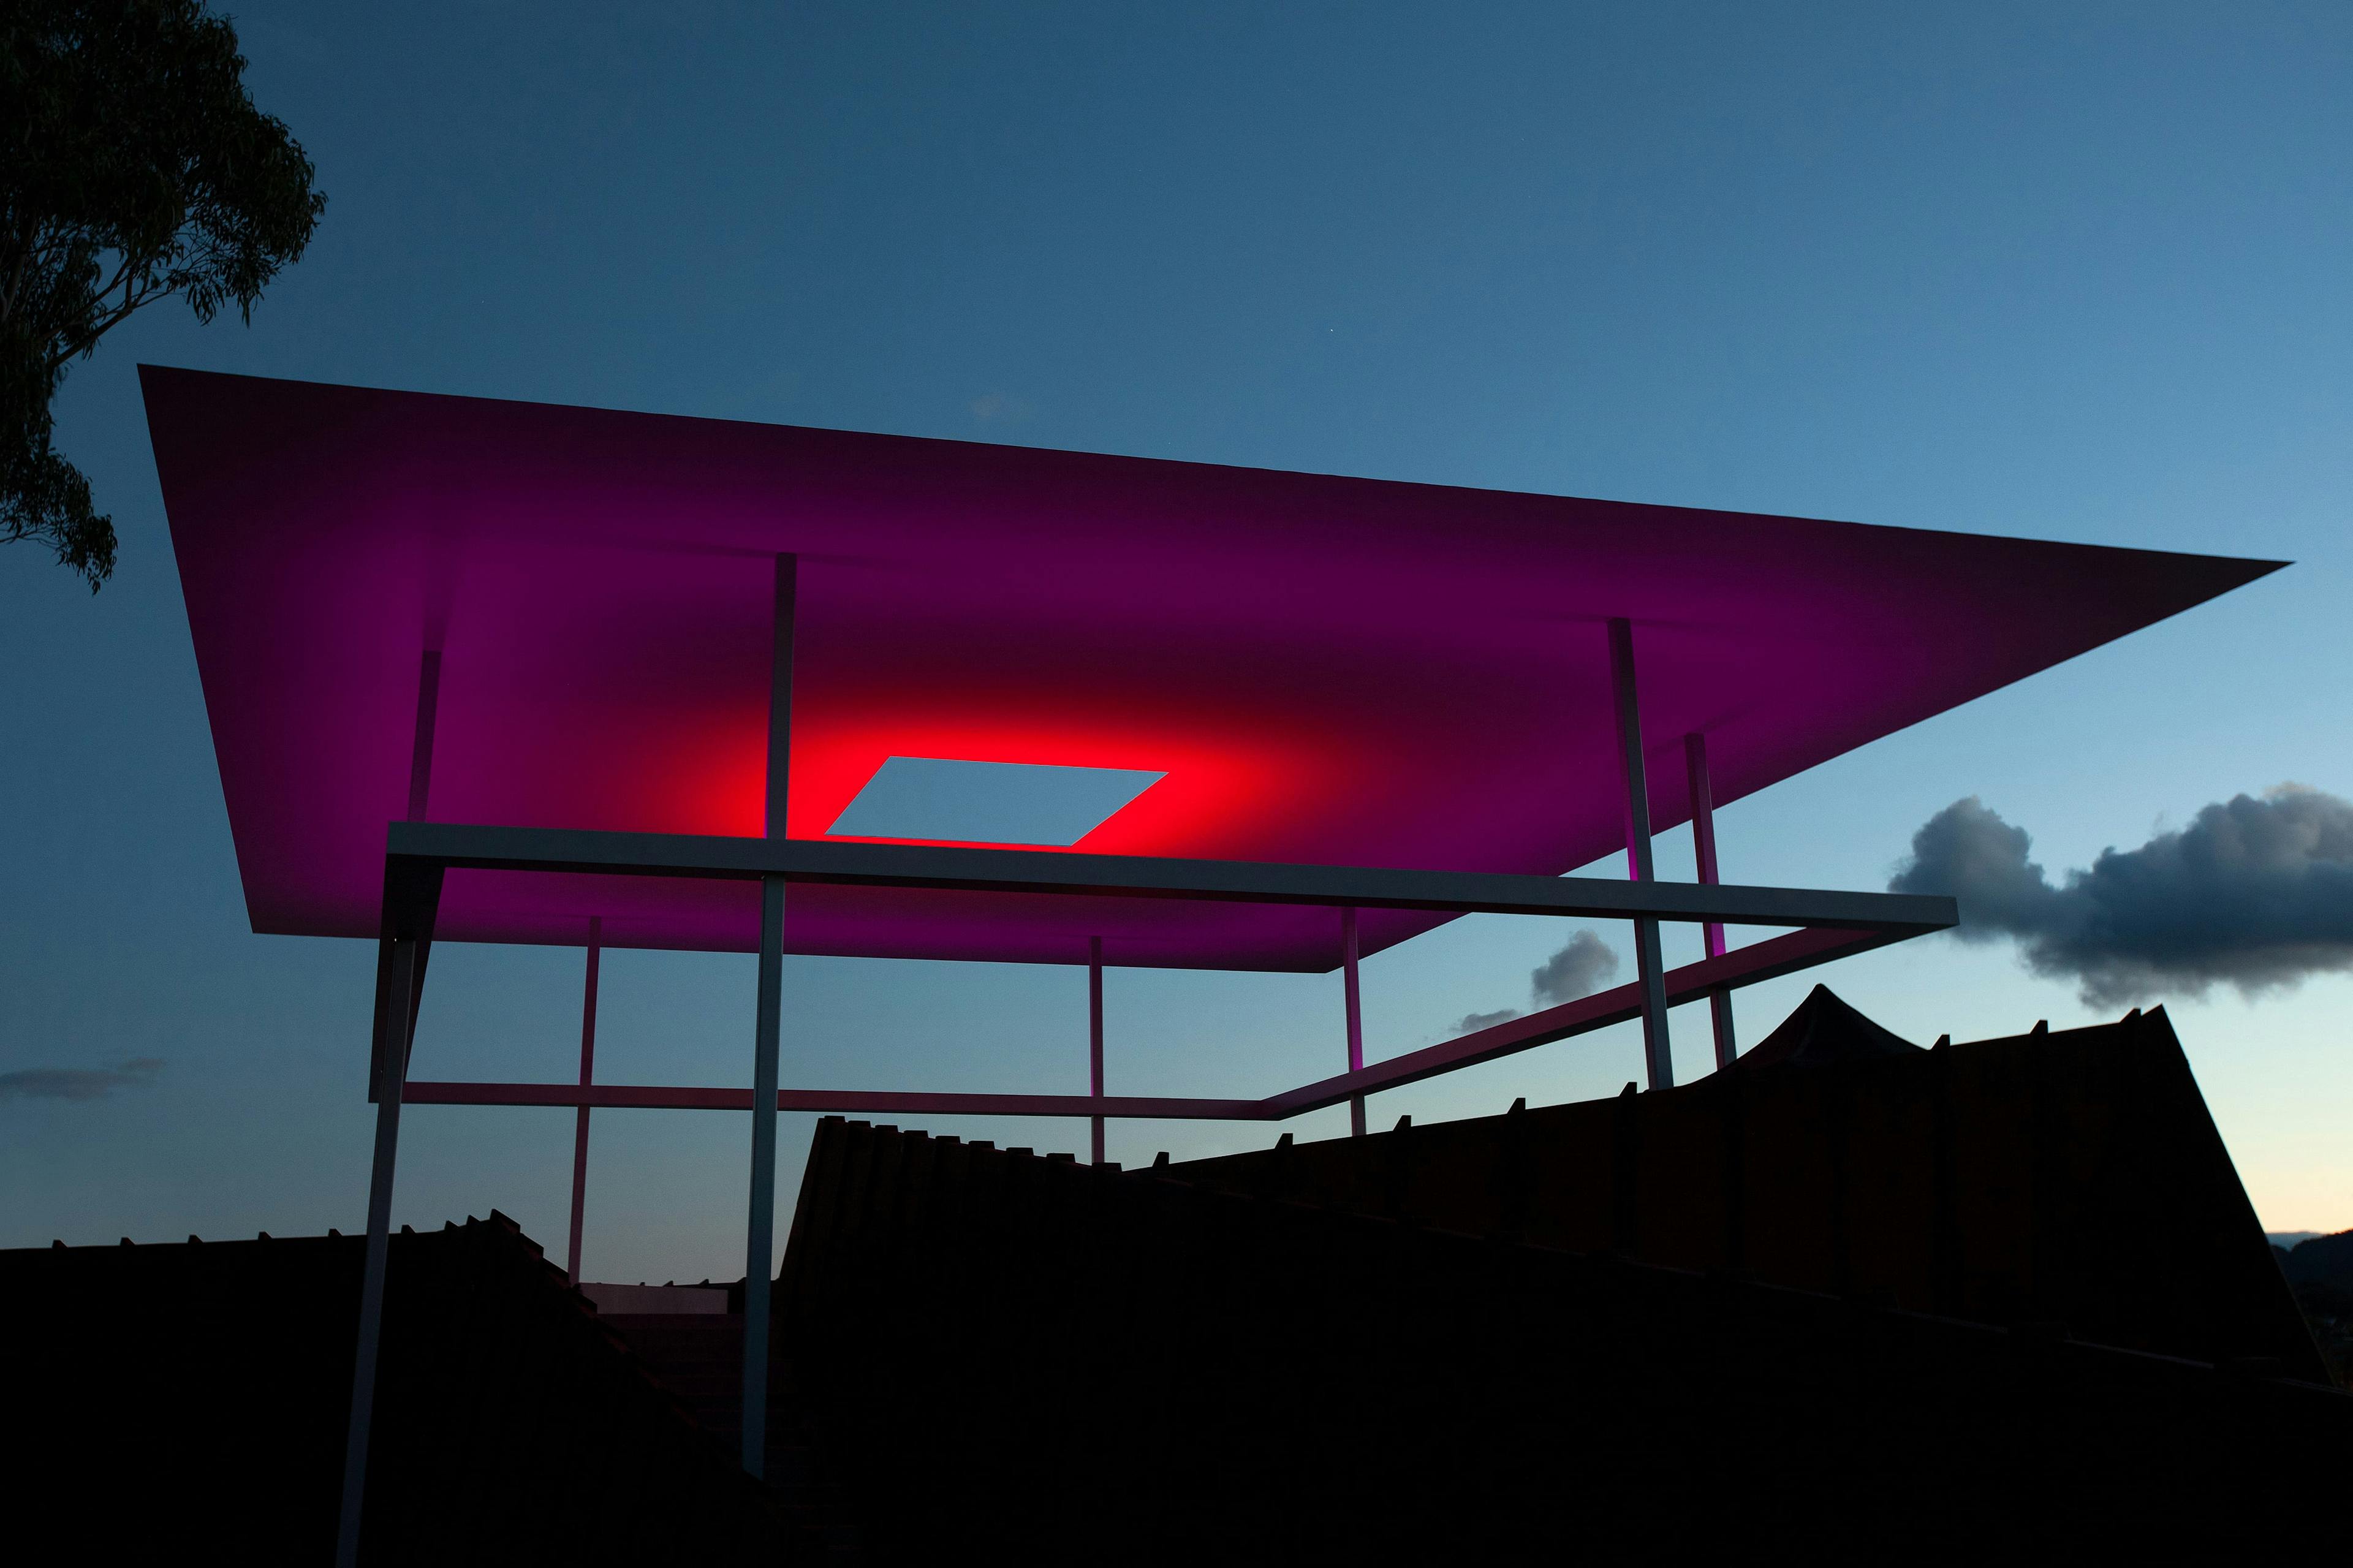 A twilight sky with a structure lit in pink and red with a hole in the centre.